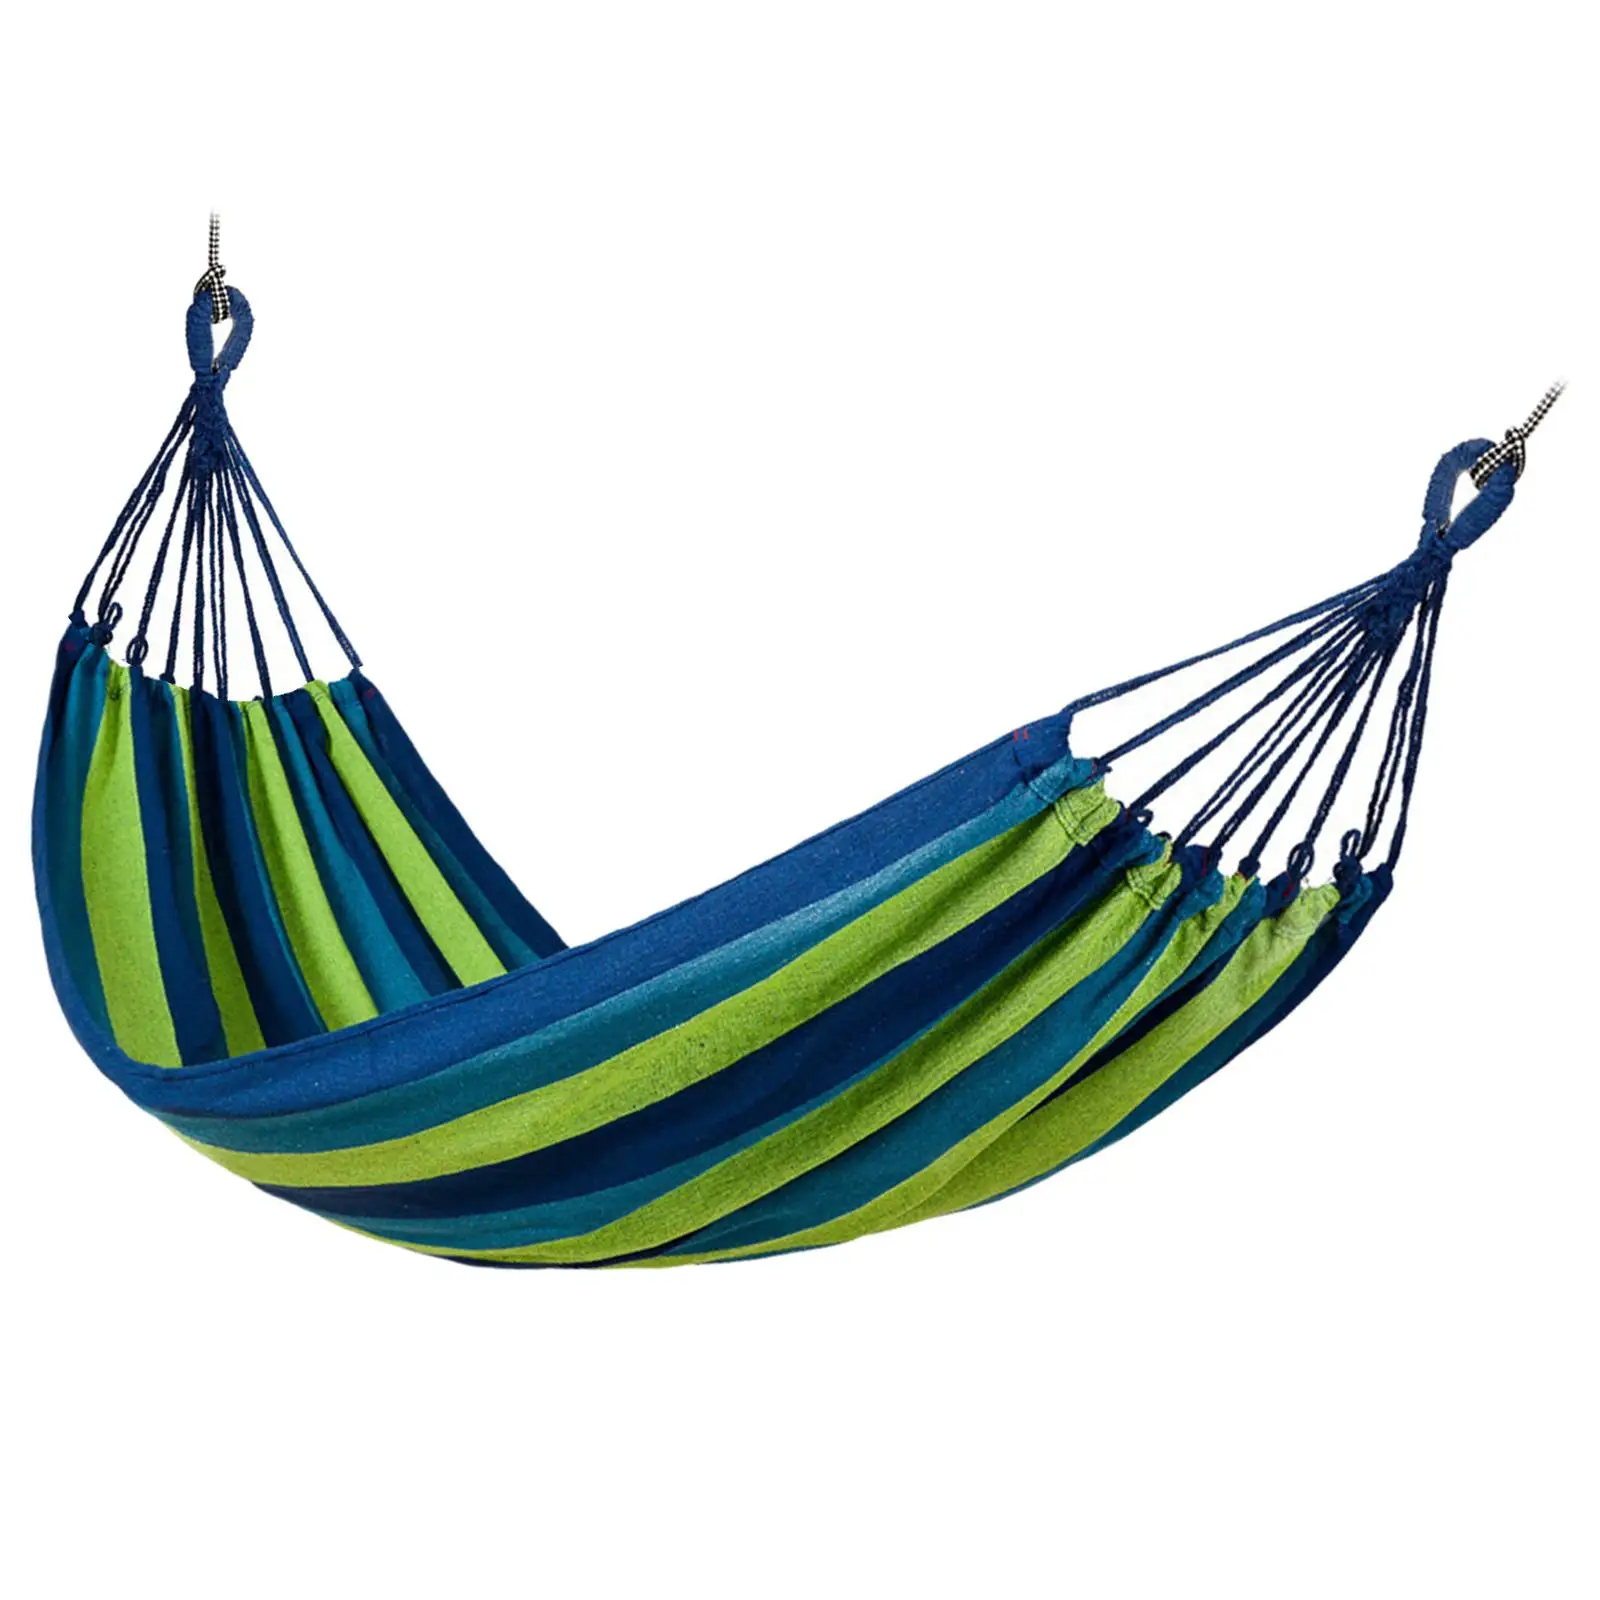 Double Camping Hammock Swing Bed with Storage Bag for indoor e outdoor Patio Yard Garden Balcony Beach